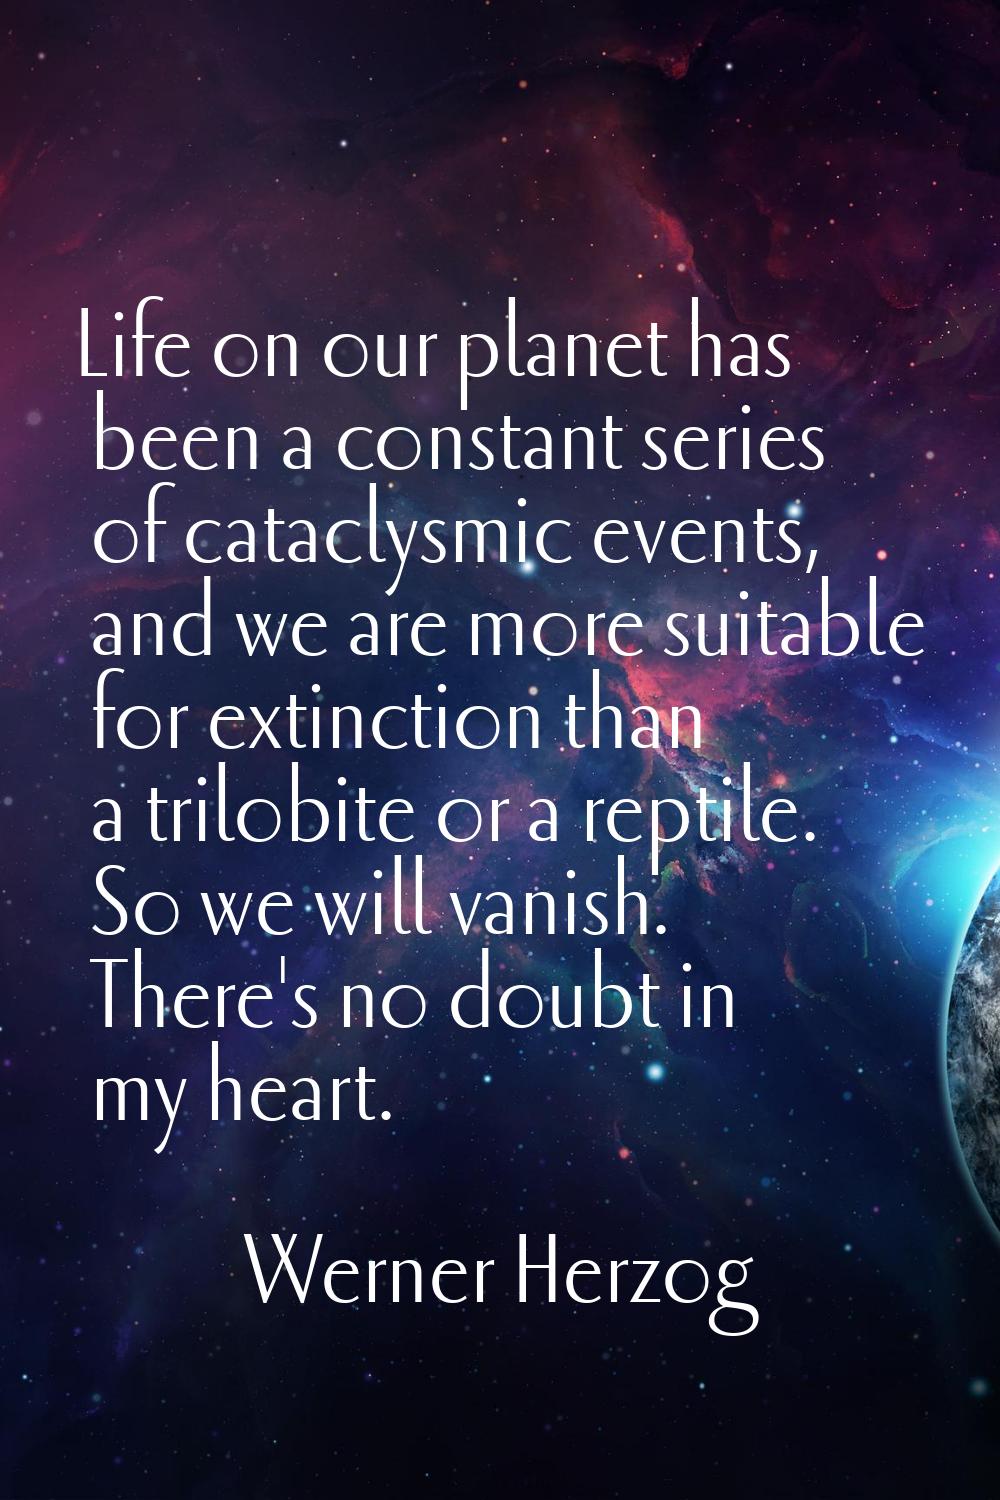 Life on our planet has been a constant series of cataclysmic events, and we are more suitable for e